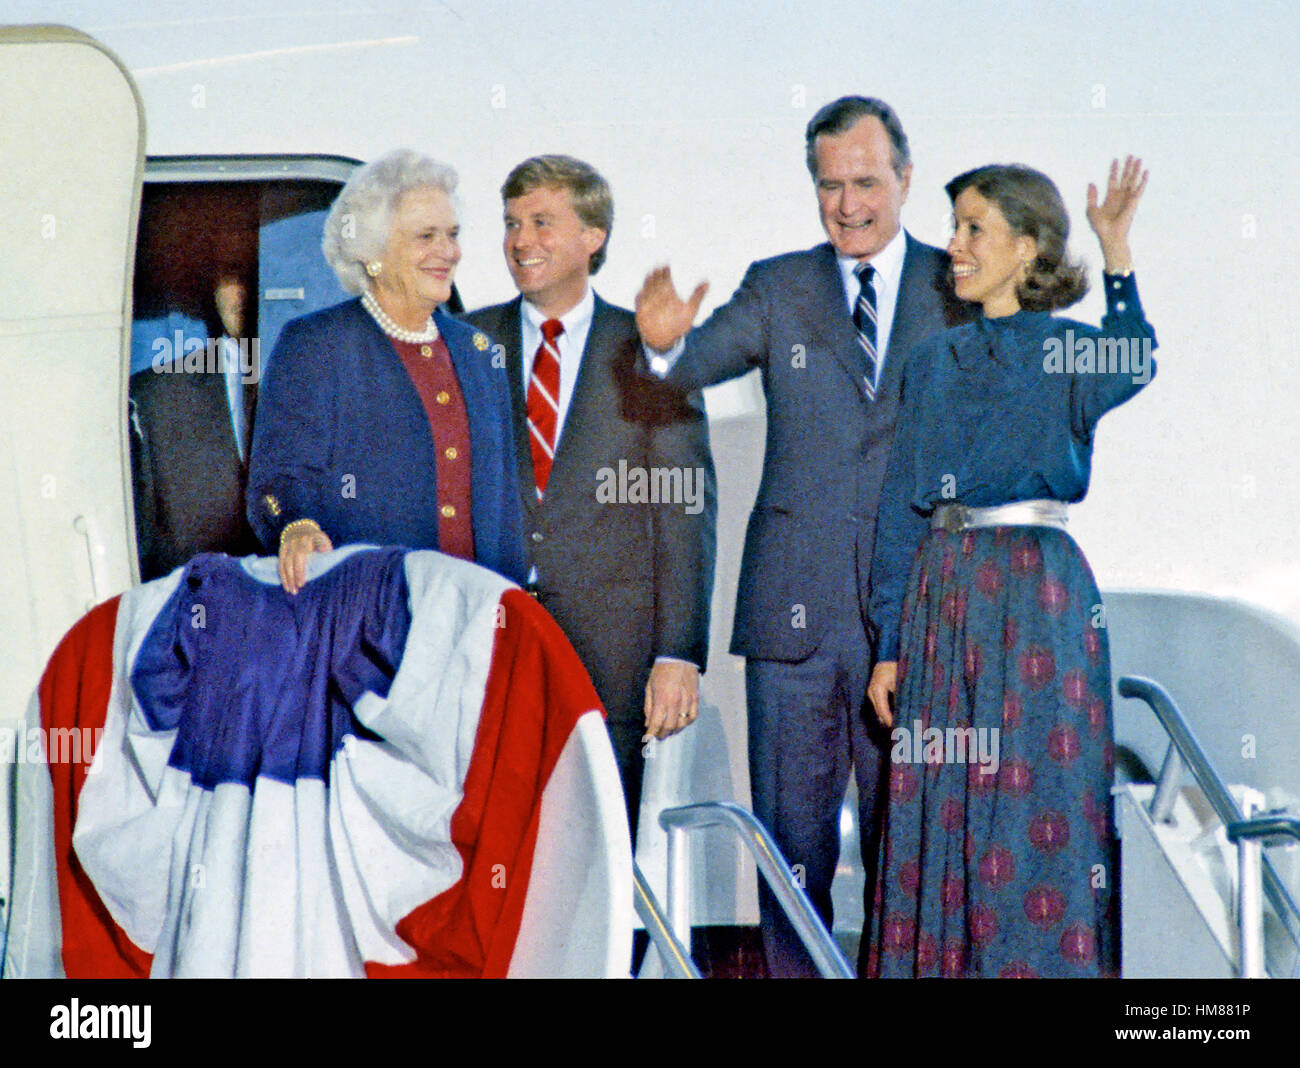 United States President-elect George H.W. Bush and Vice President-elect Dan Quayle return to Andrews Air Force Base, just outside Washington, D.C. after winning the 1988 Presidential Election on November 9, 1988. From left to right: Barbara Bush, VP-elect Stock Photo